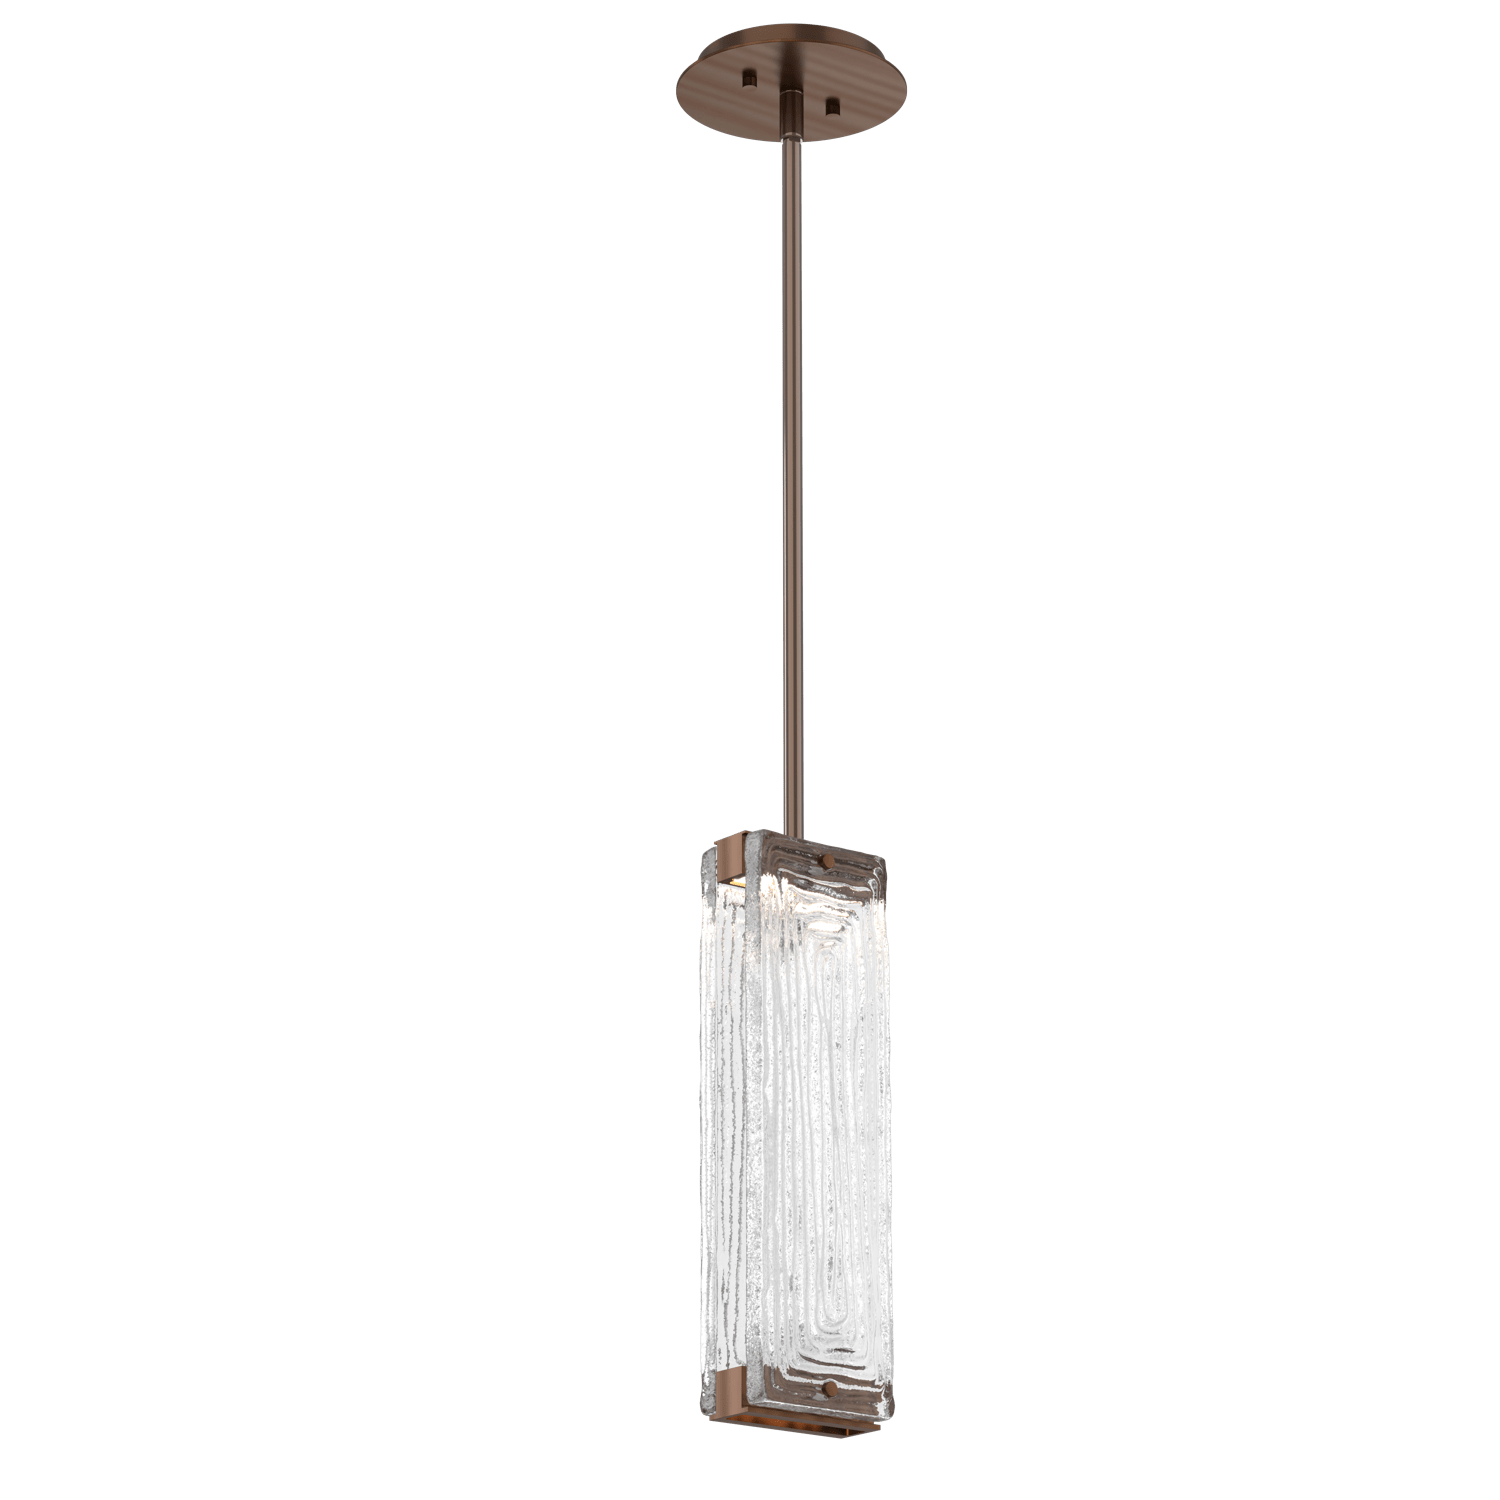 LAB0090-01-RB-TL-Hammerton-Studio-Tabulo-pendant-light-with-oil-rubbed-bronze-finish-and-clear-linea-cast-glass-shade-and-LED-lamping